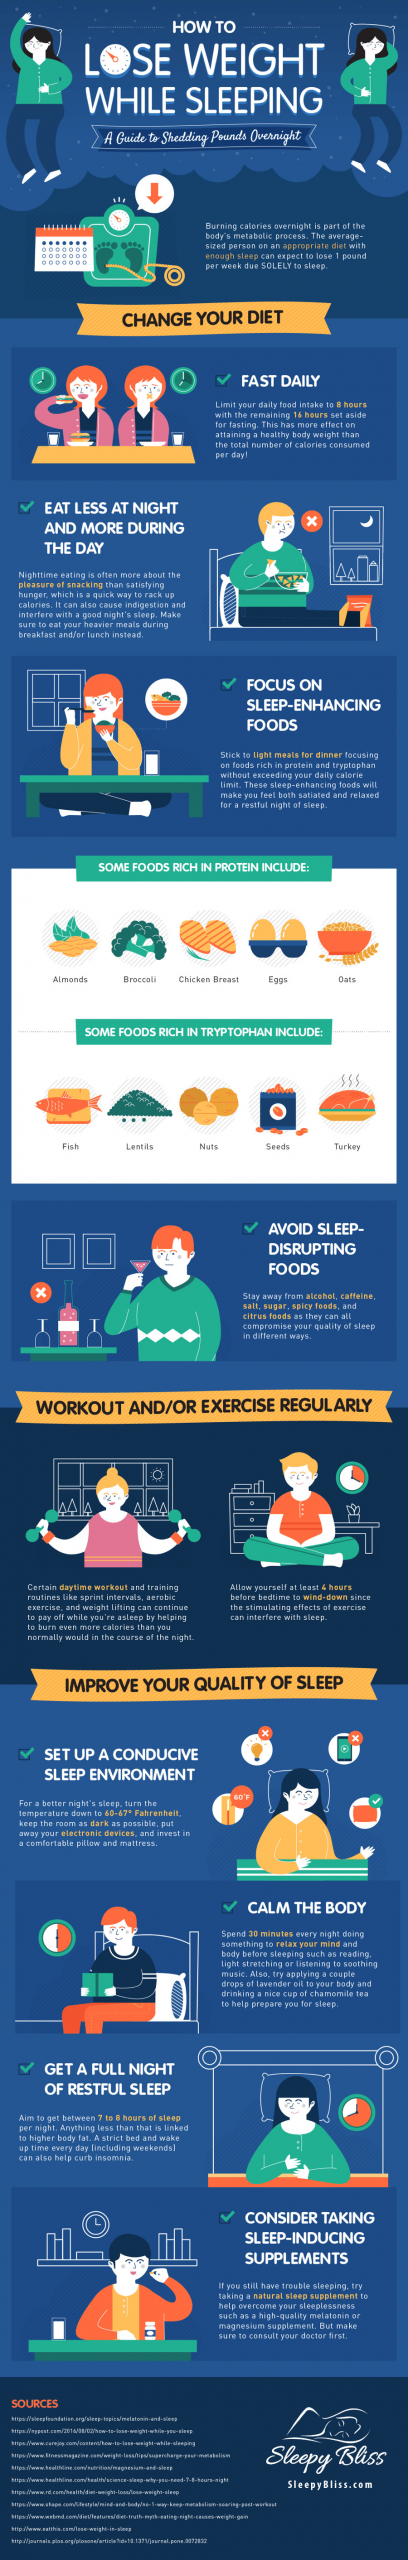 How To Lose Weight While Sleeping
 How To Lose Weight While Sleeping The Ultimate Guide